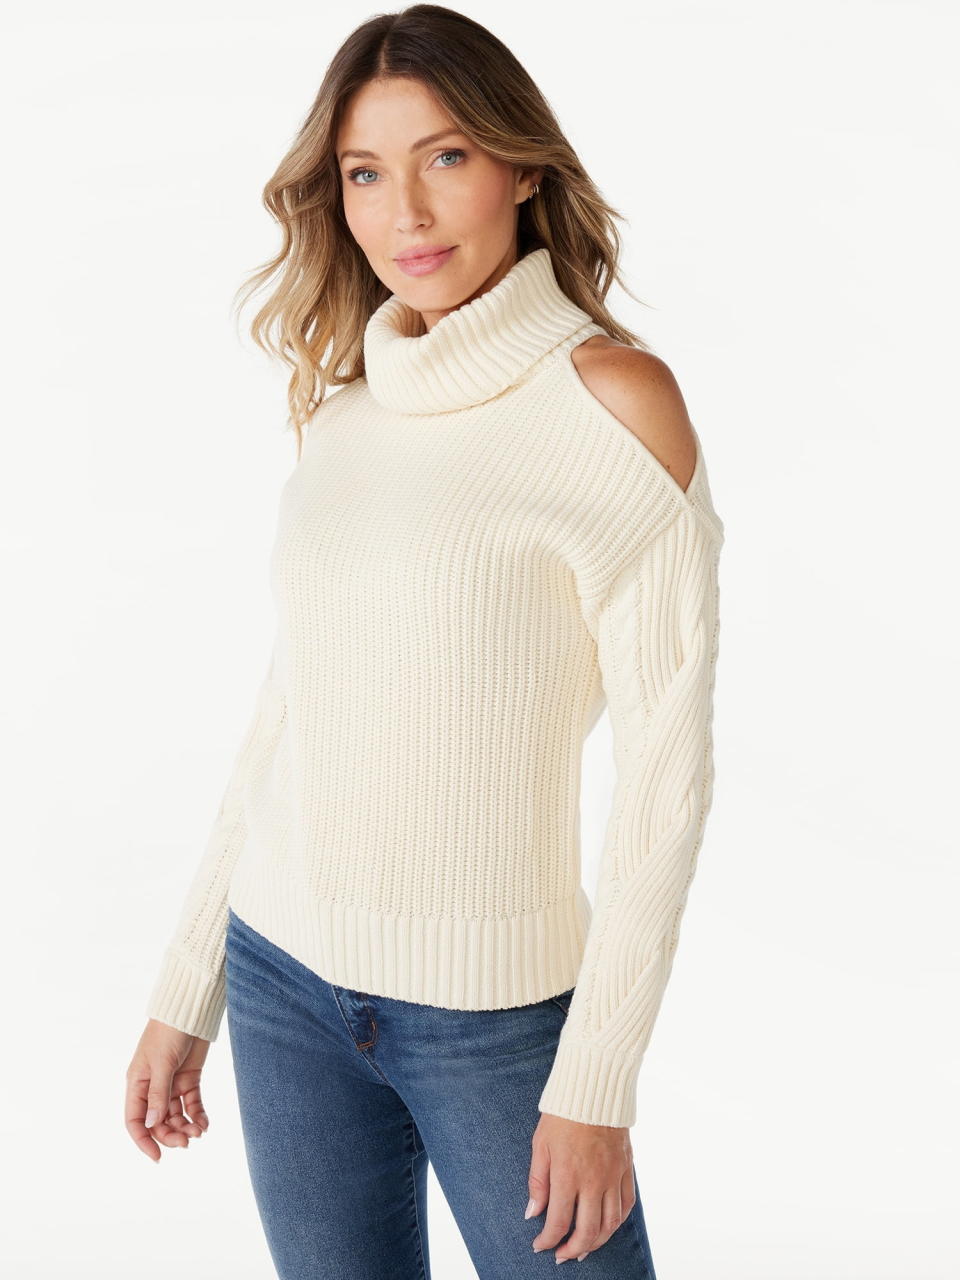 a model wearing the sweater in cream